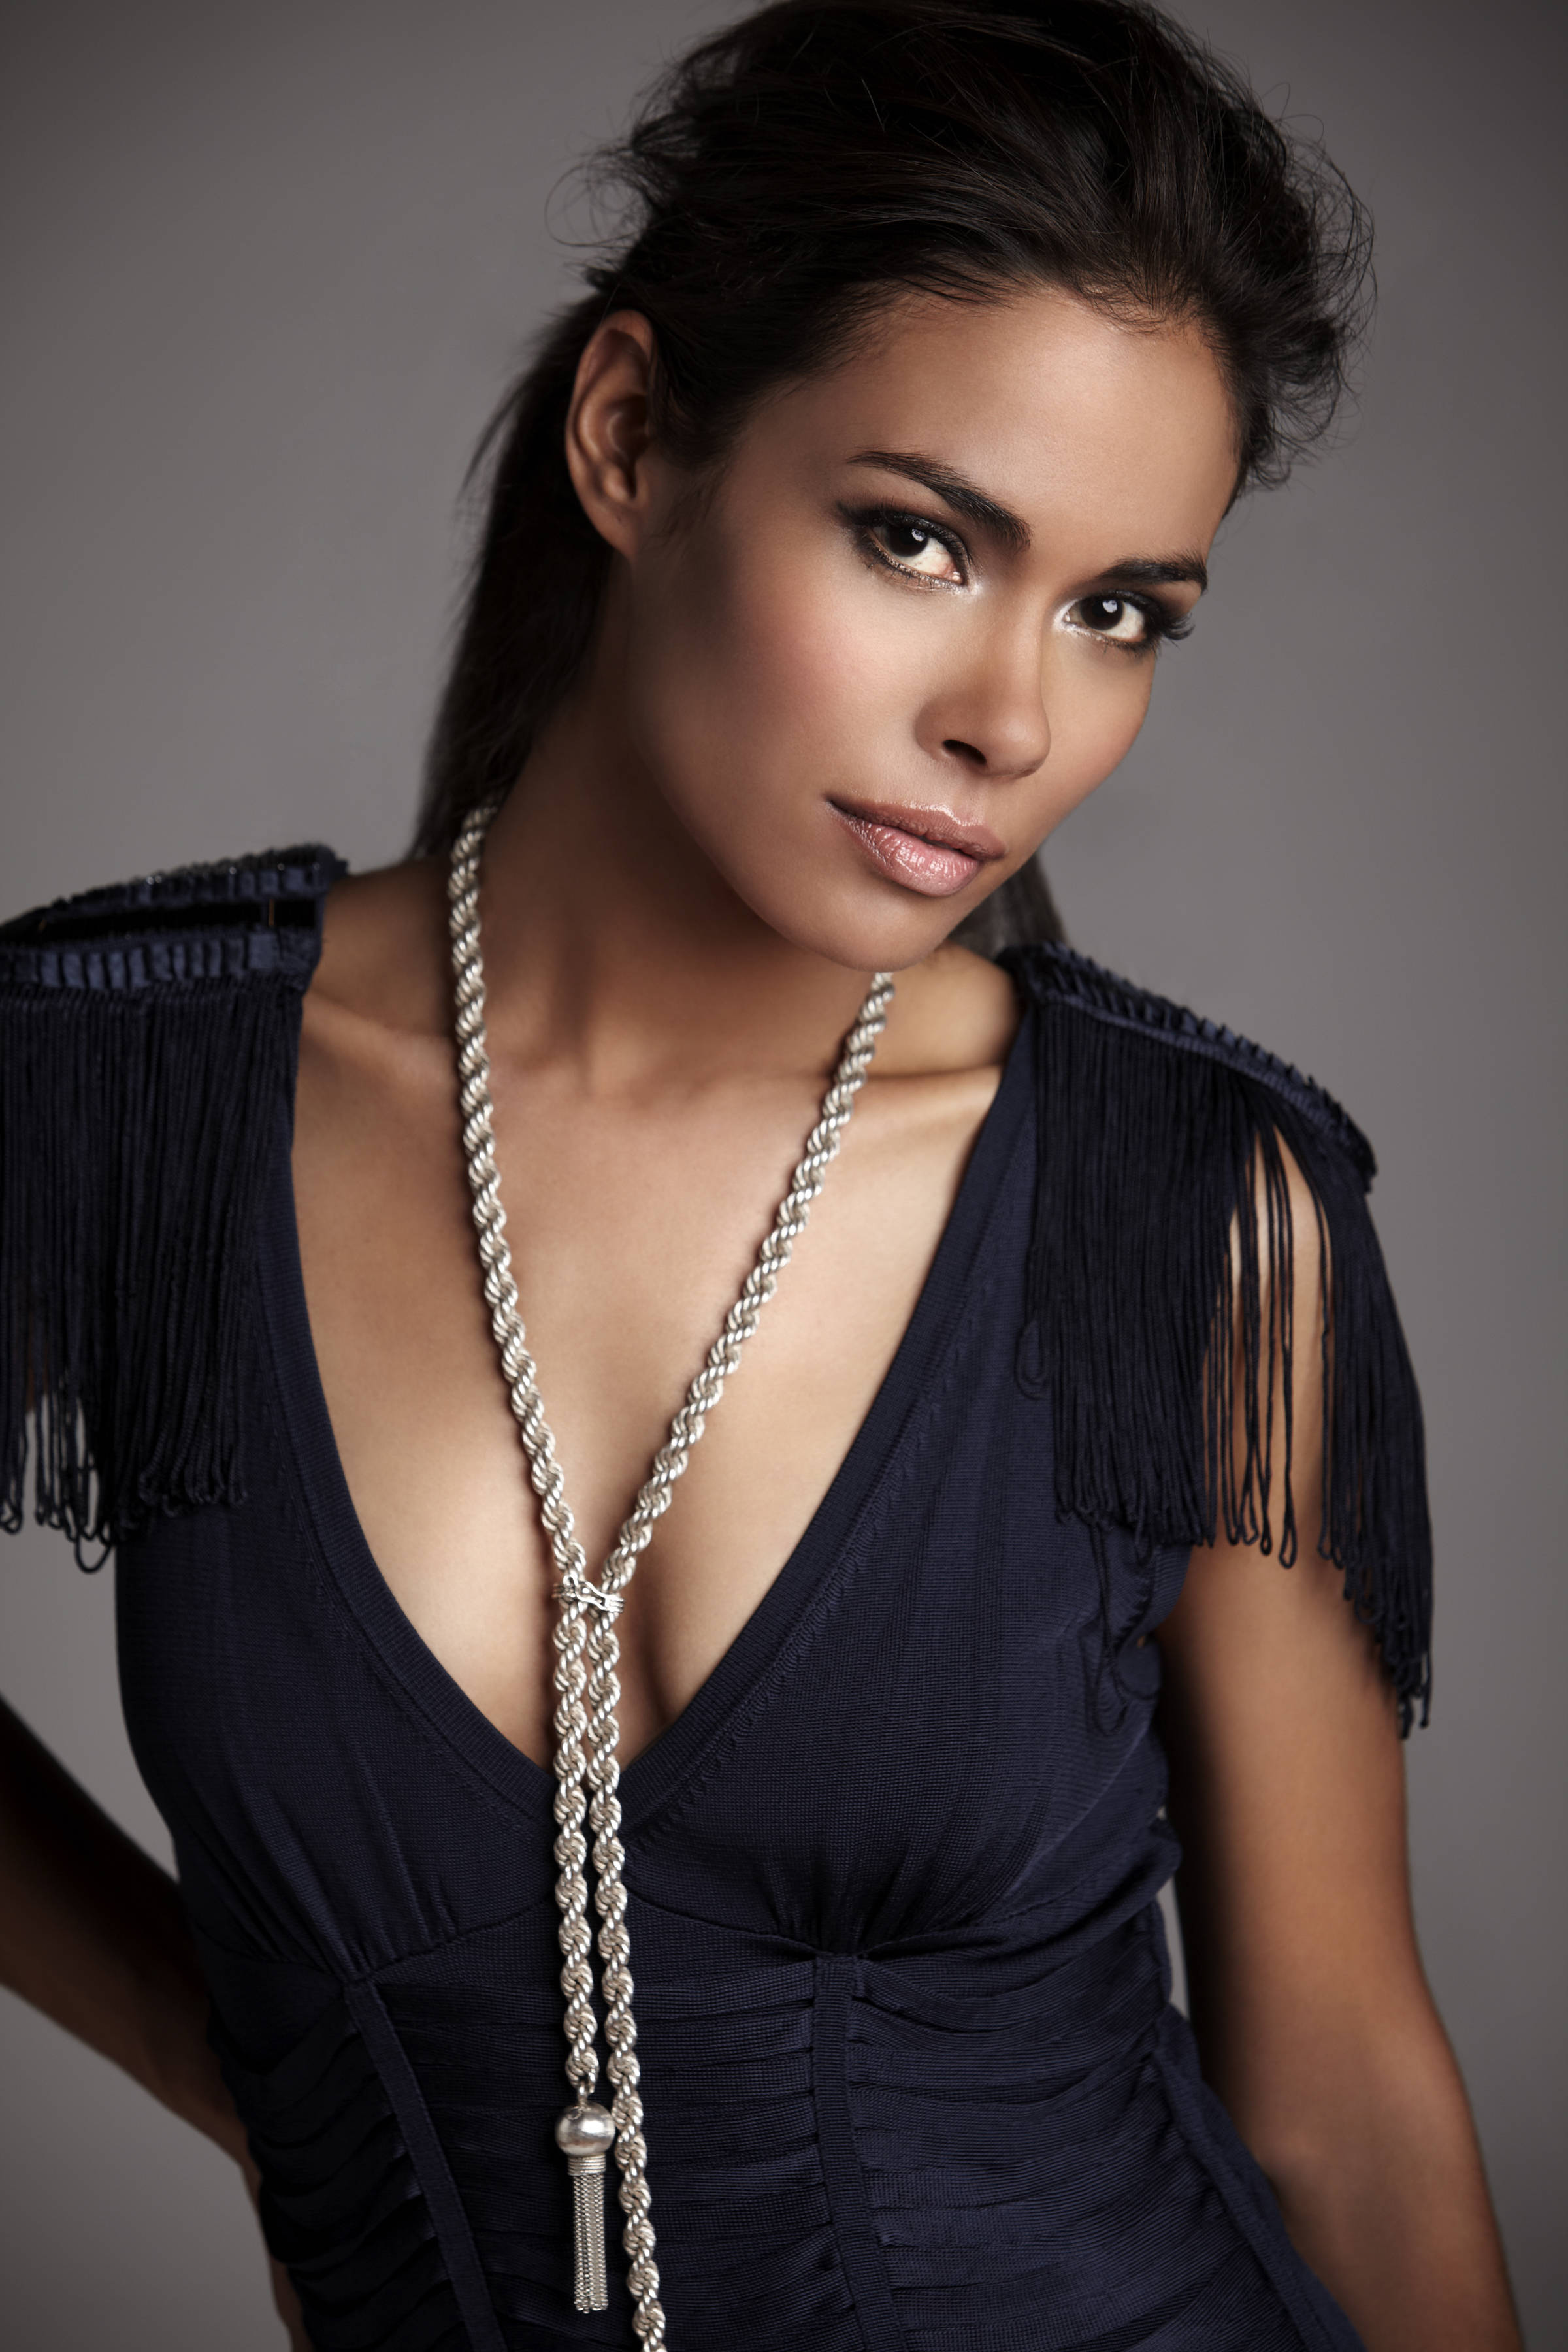 Daniella Alonso Joins Las Reinas As Lead Hollywood News Source